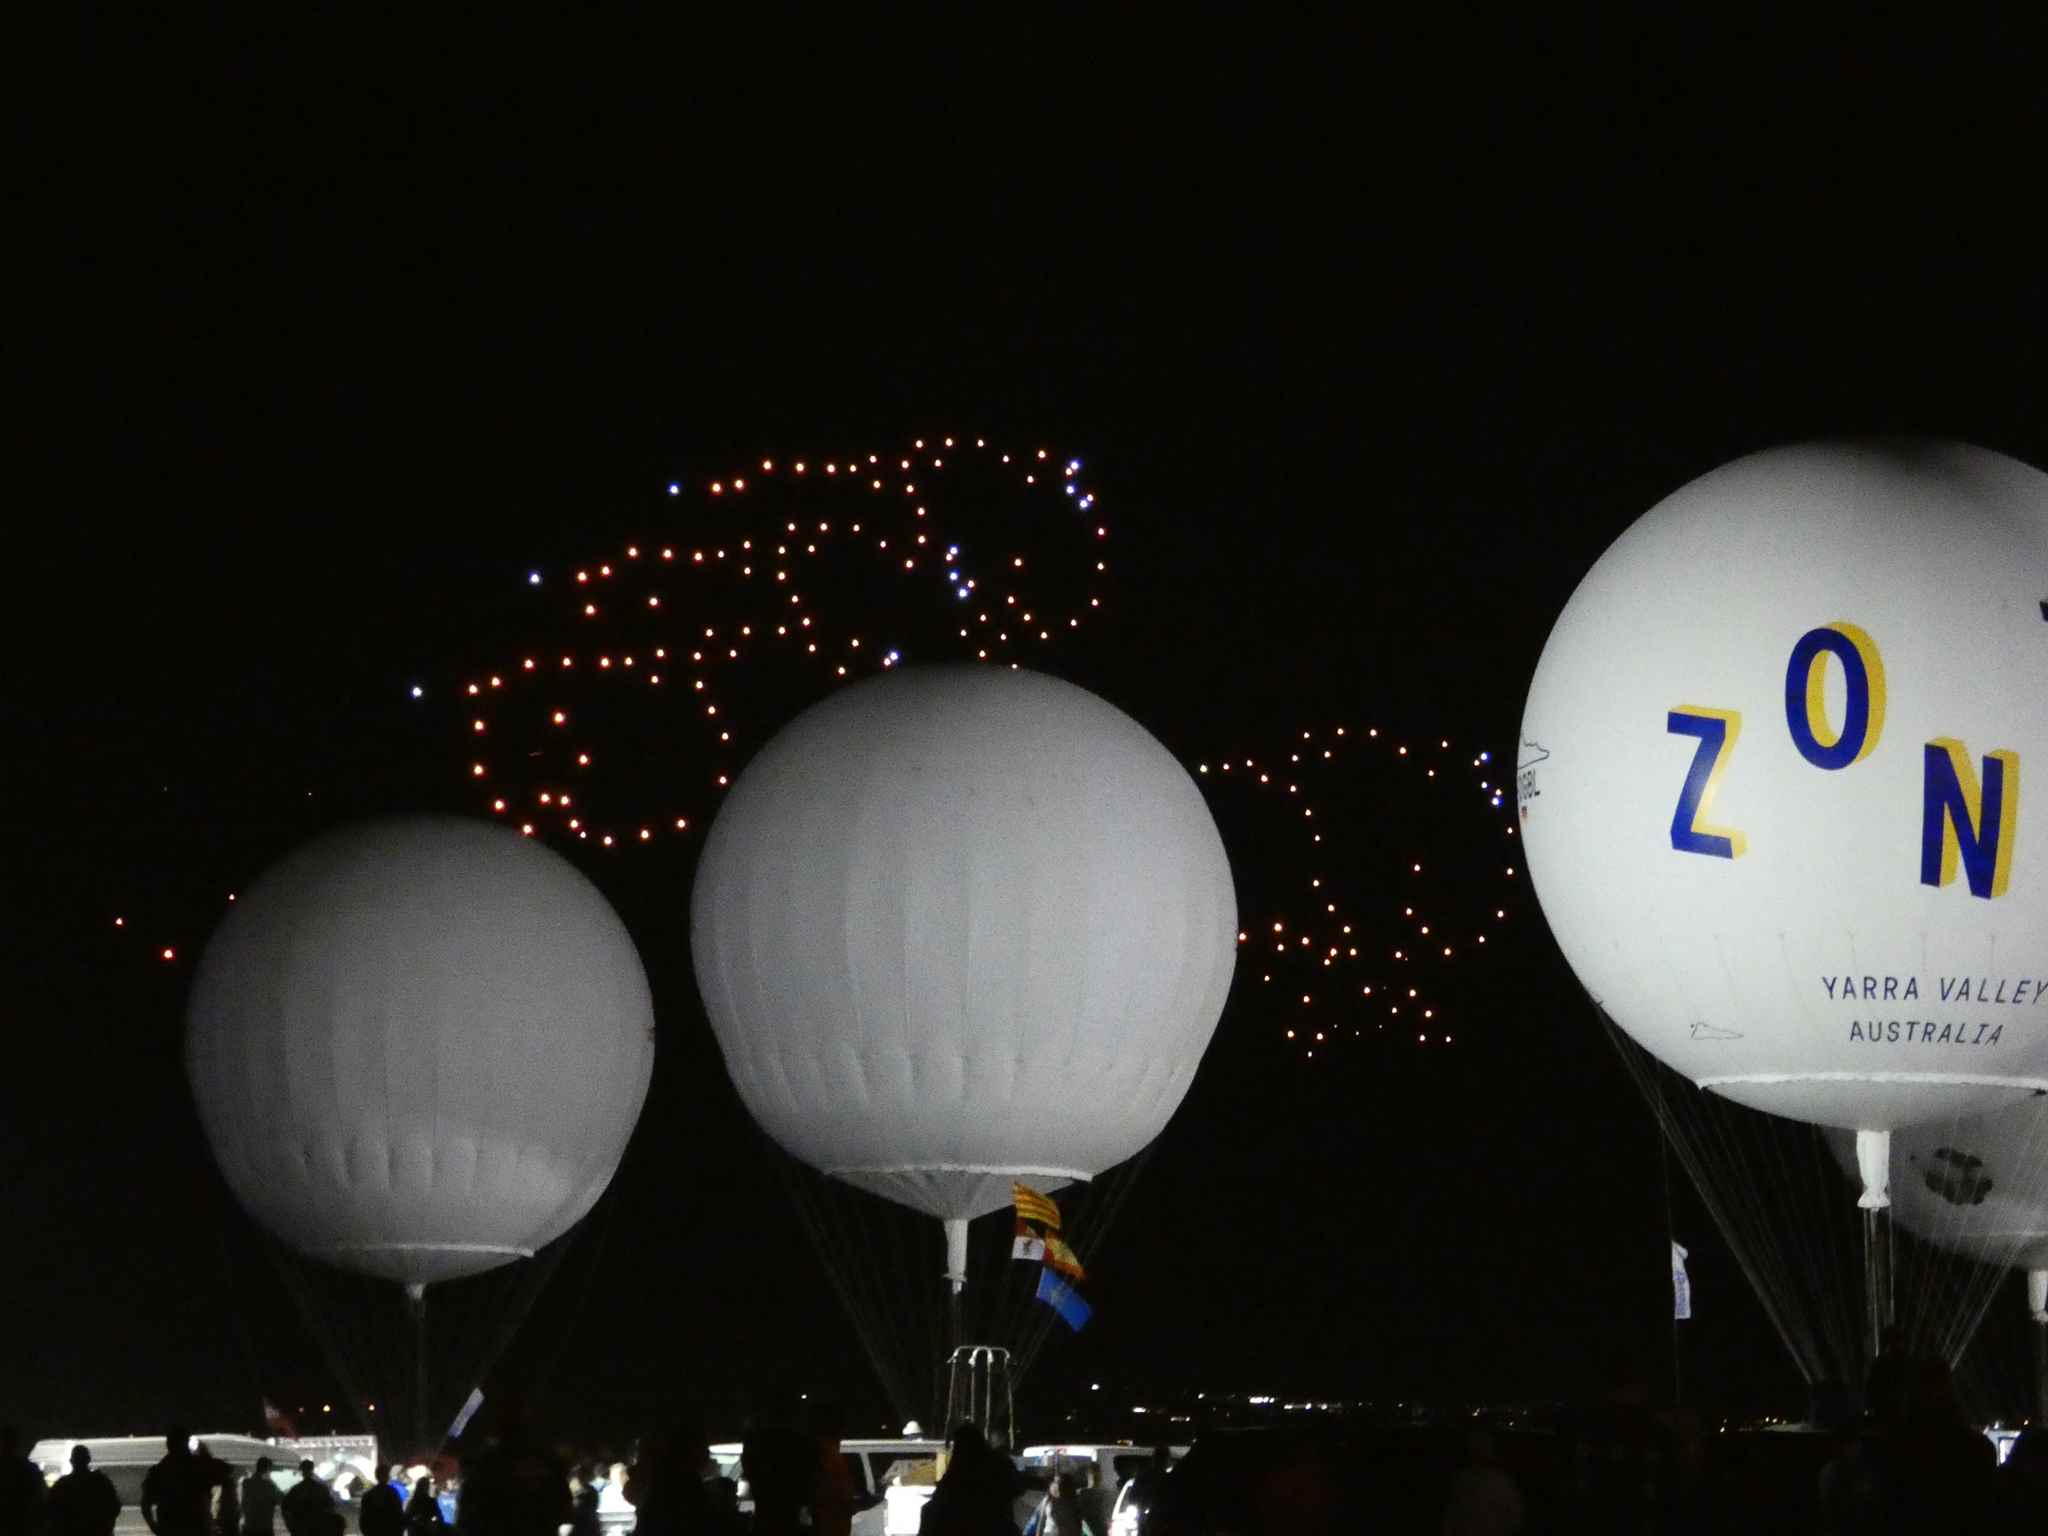 helium balloons that leave for earth circumnavigation tonight